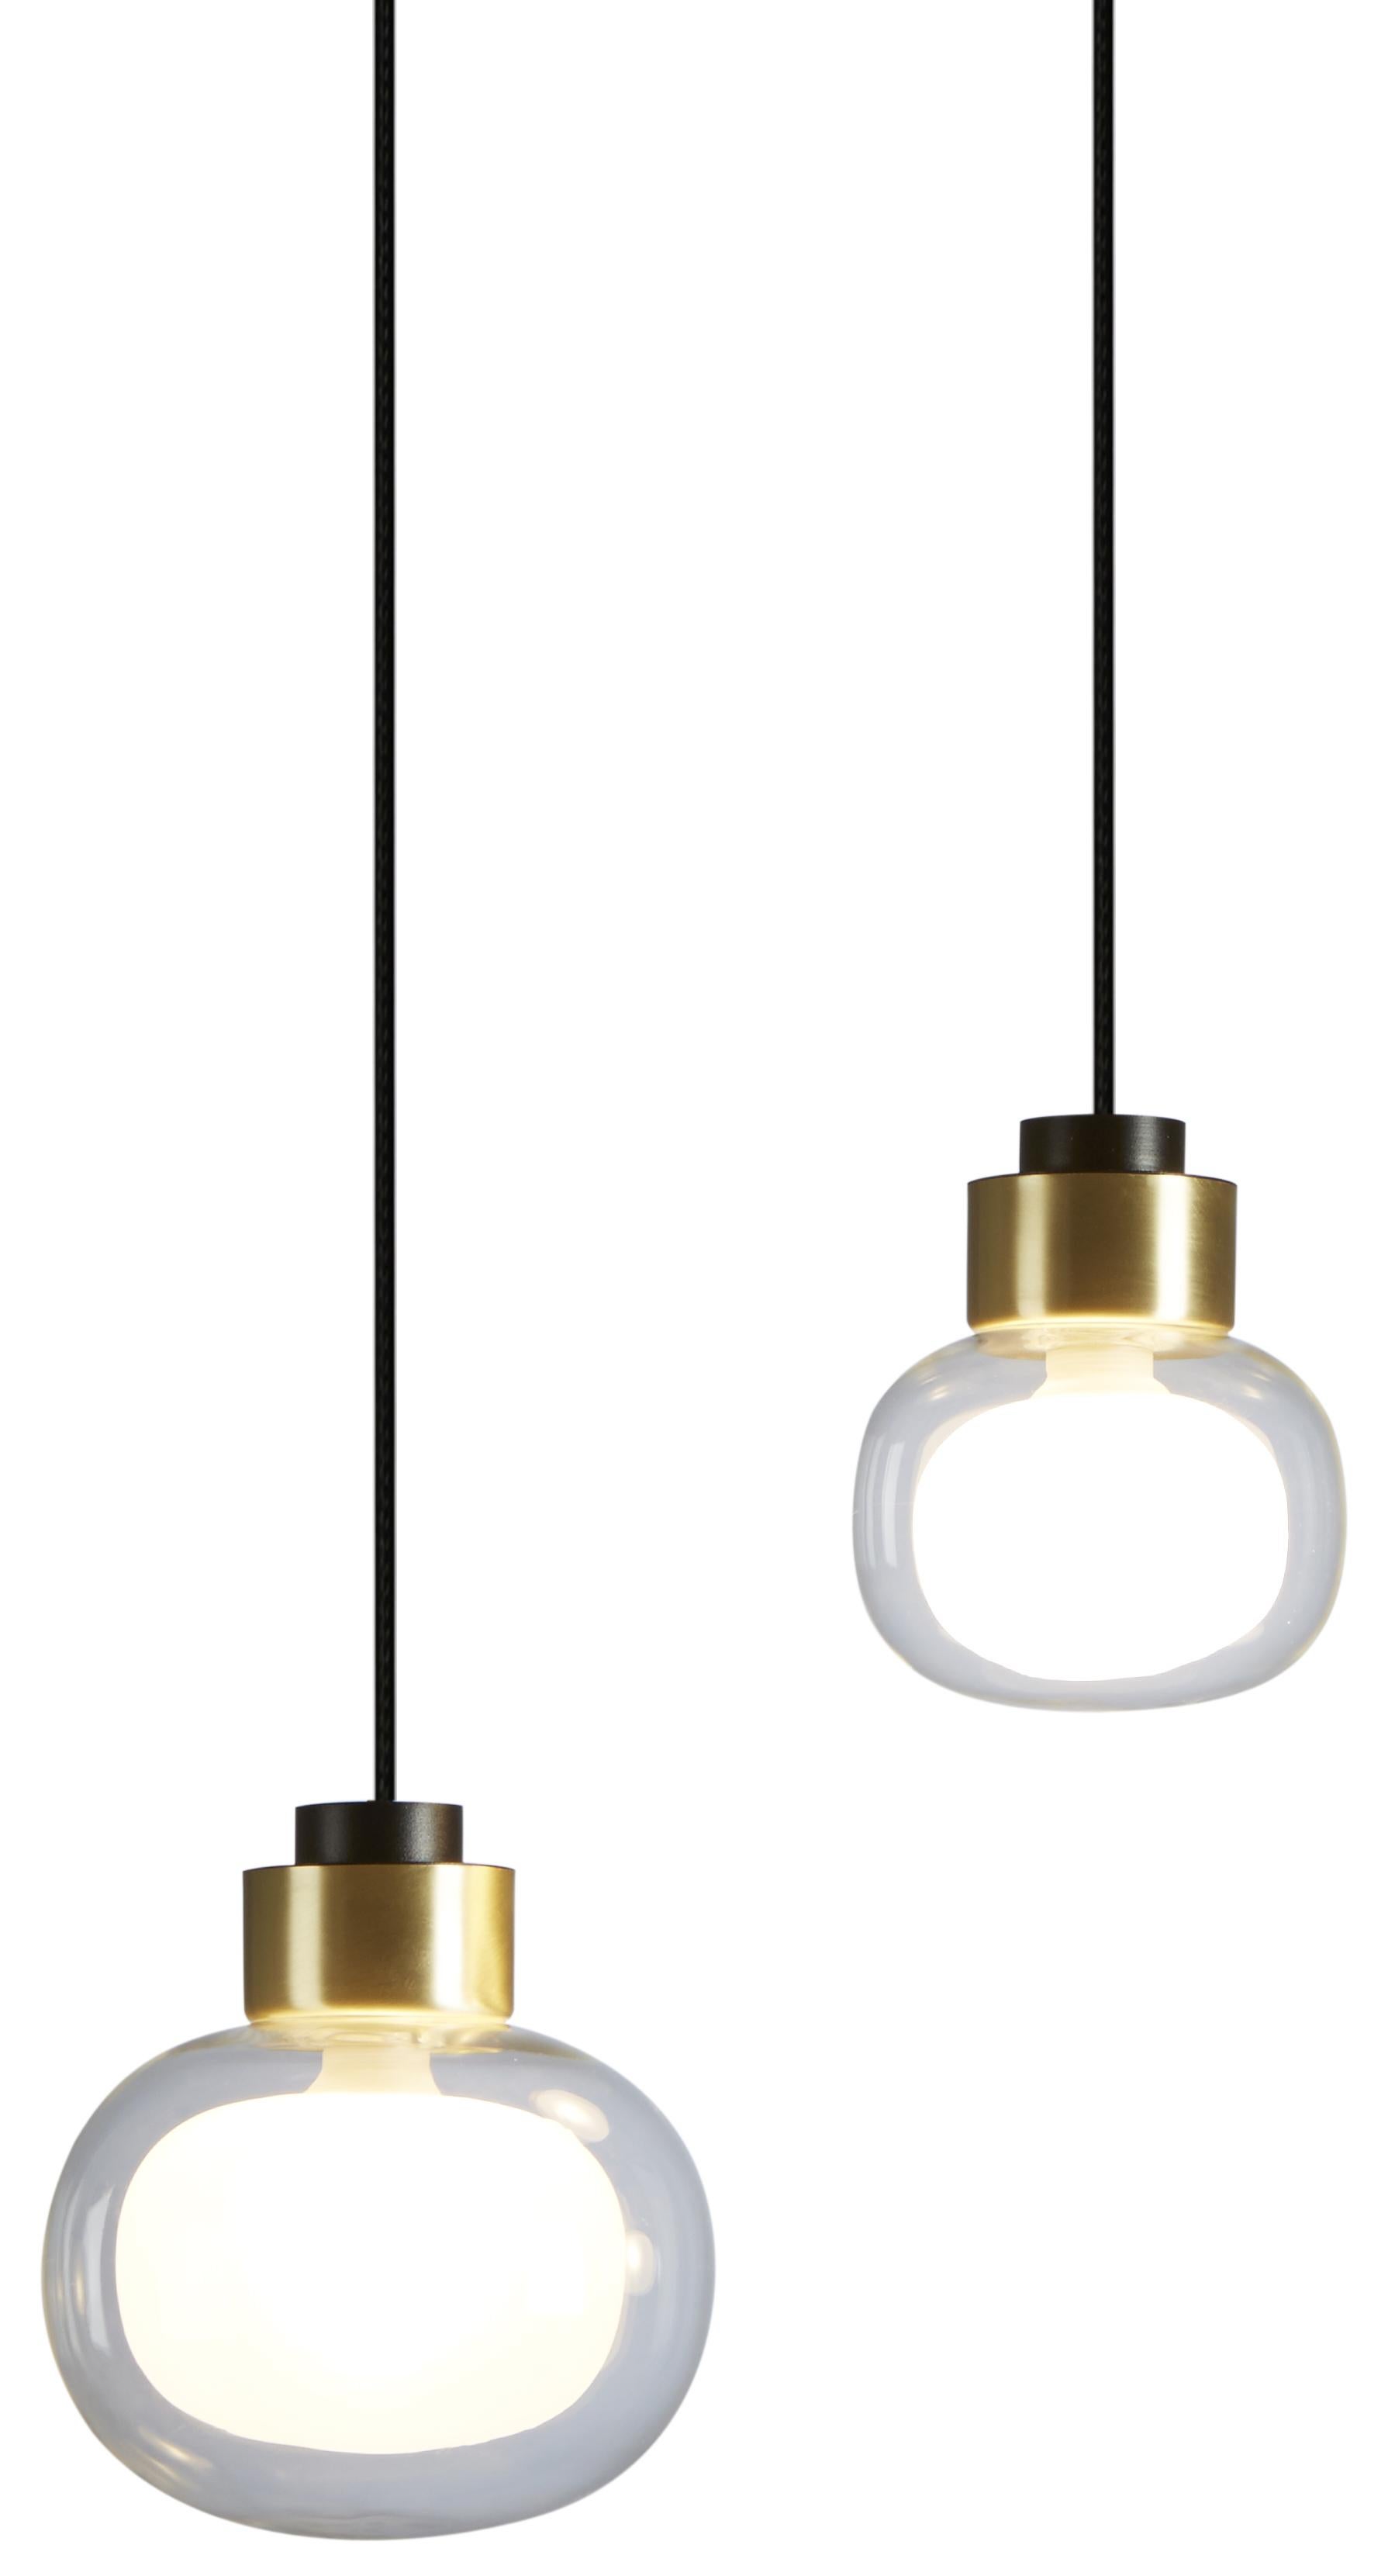 Contemporary Pendant Lamp 'Nabila 552.21' by Tooy, Black Chrome, Smoked Glass For Sale 4